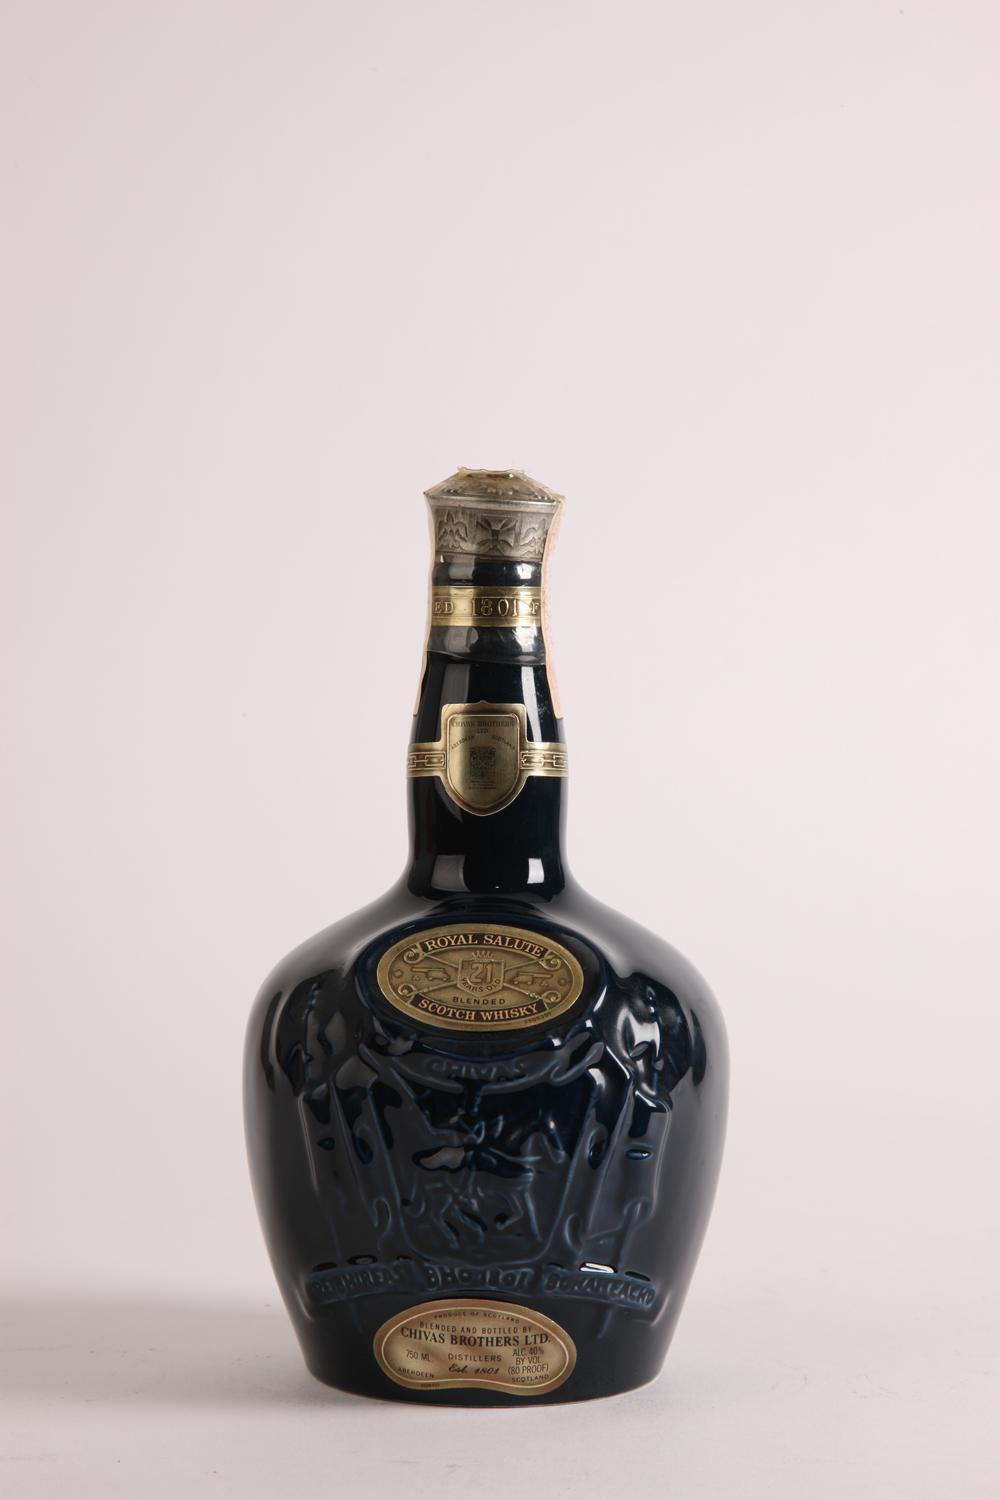 Chivas Royal Salute 21 Years Old - Sapphire Flagon - Just Whisky Auctions